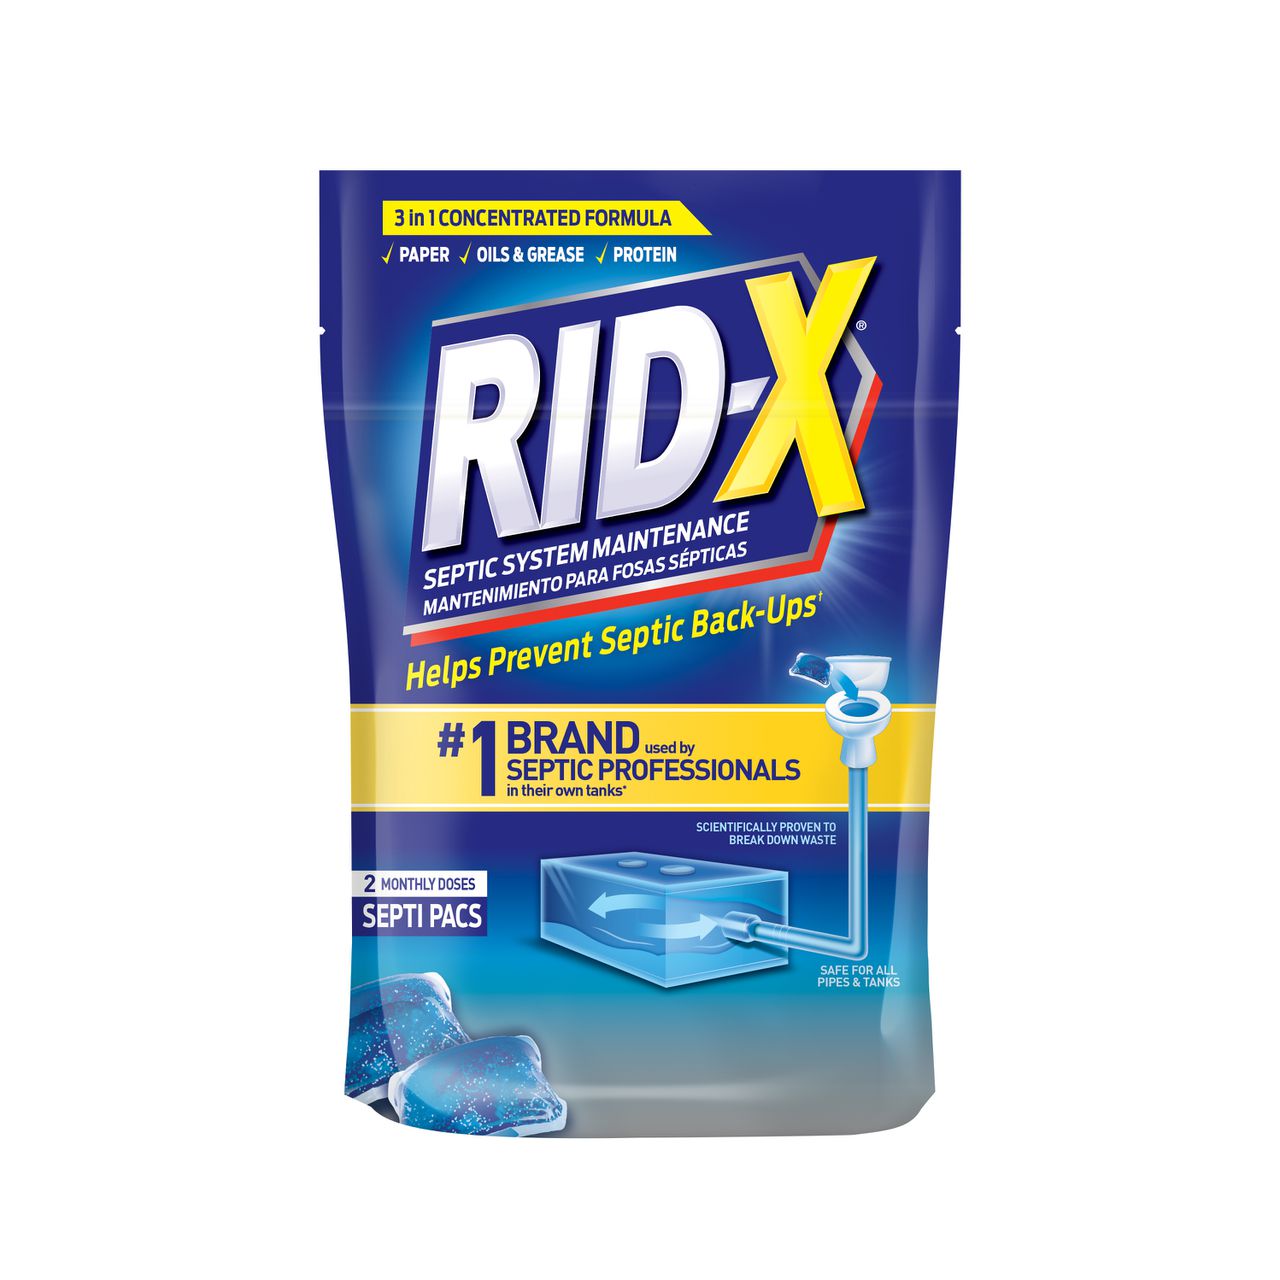 Rid-x Septic Treatment, 12 Month Supply of Septi-Pacs, 12.6 oz